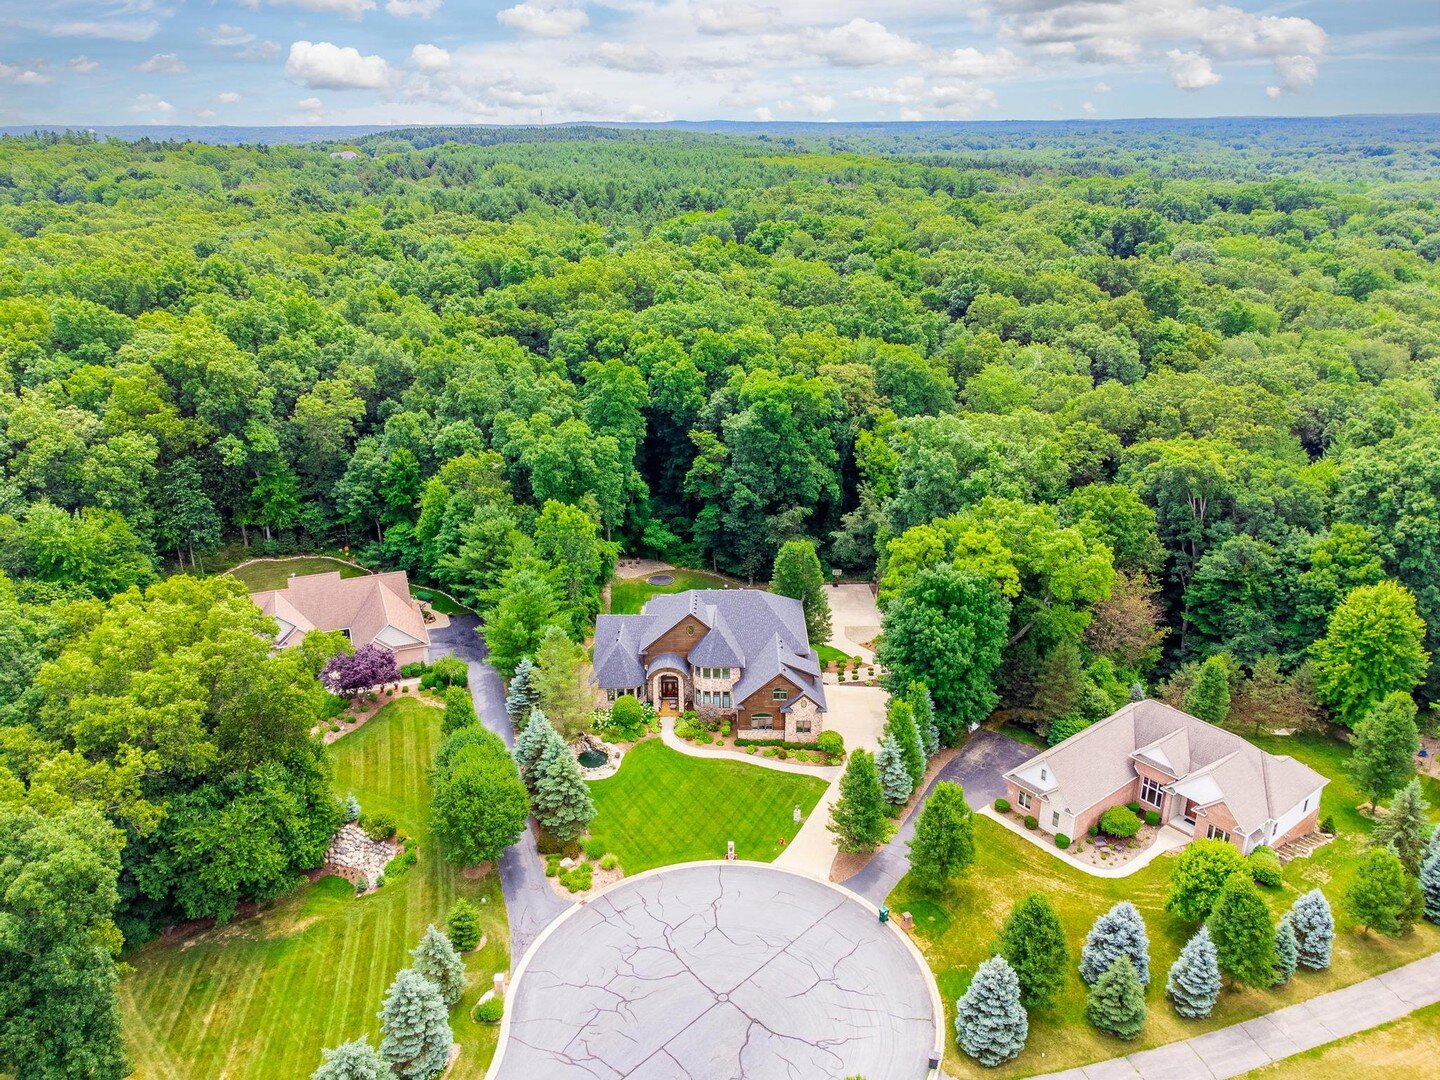 Show stopper! The lower backyard is completely private and surrounded by forest. This stunning home will make you feel like you are on a permanent vacation!

Check out this stunning home located in Marion Township.

@soldbymarissa 

#Vacation #reales